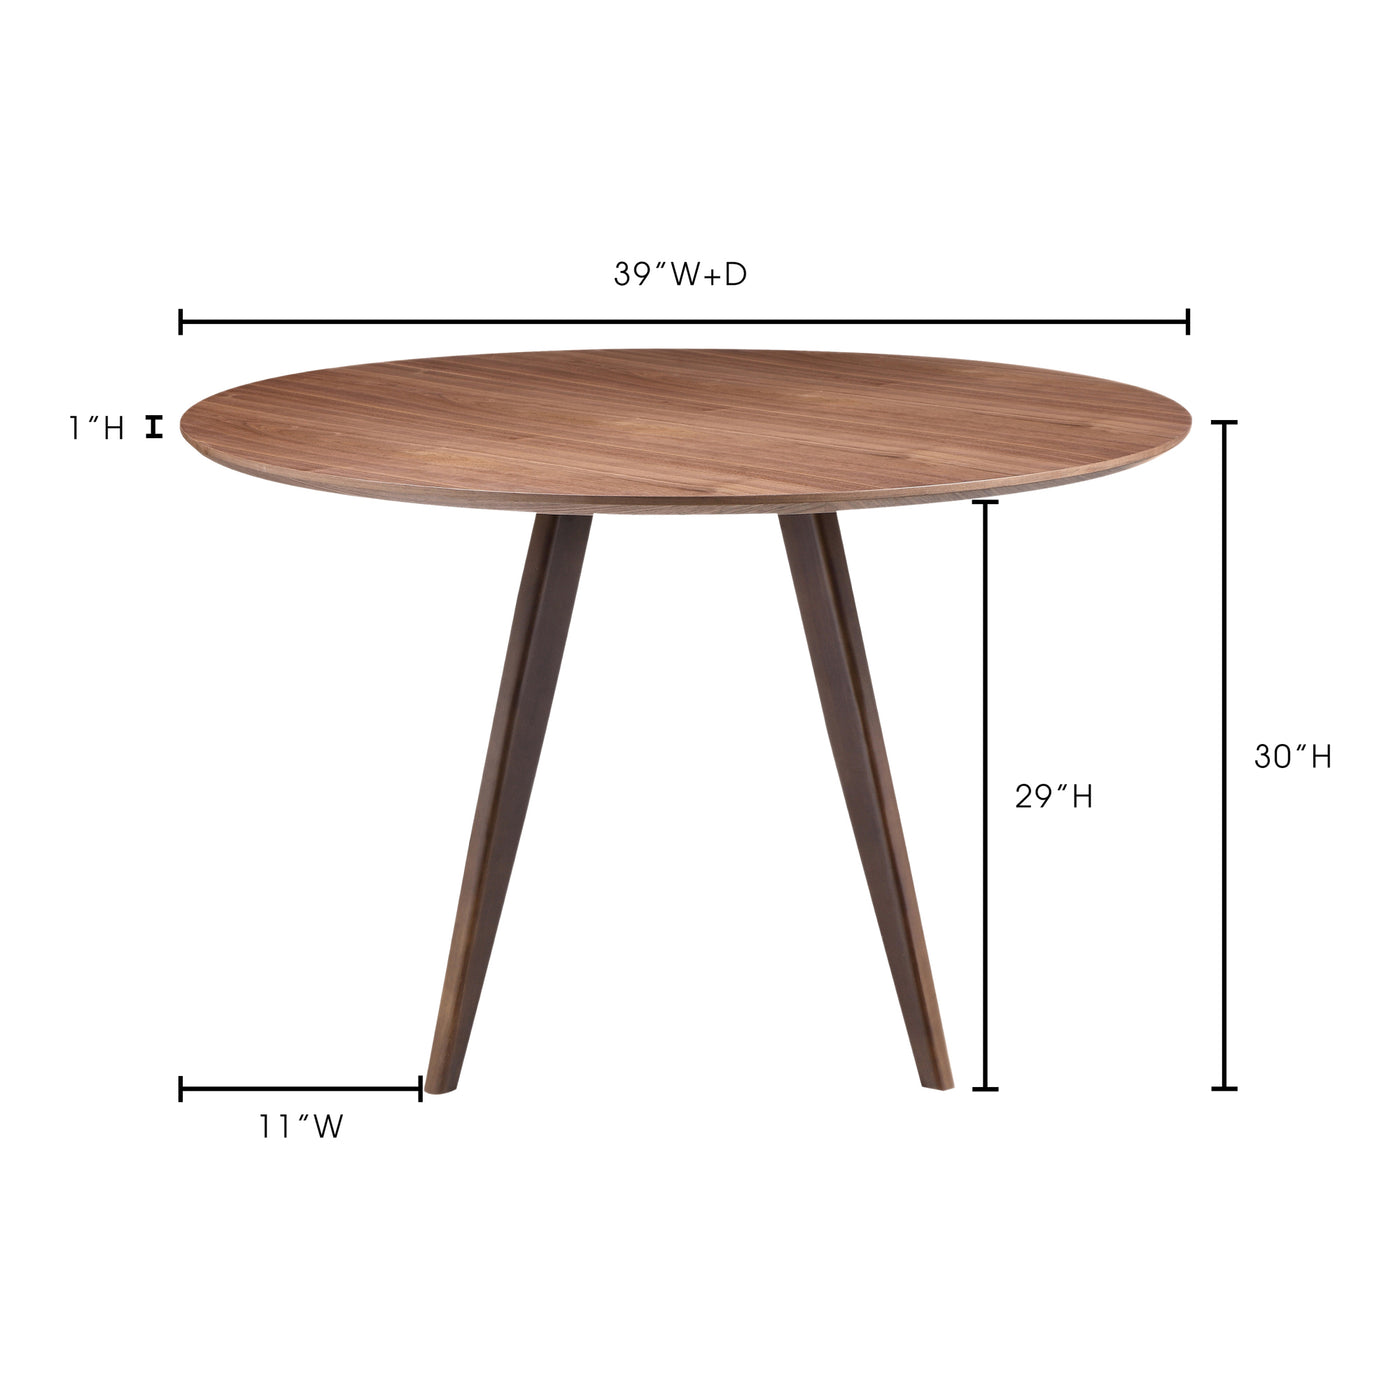 Simple, contemporary style. Perfect size for smaller dining area, condo or loft.
<h6>Dimensions</h6>
H= 30
W= 39
D= 39
<h6...